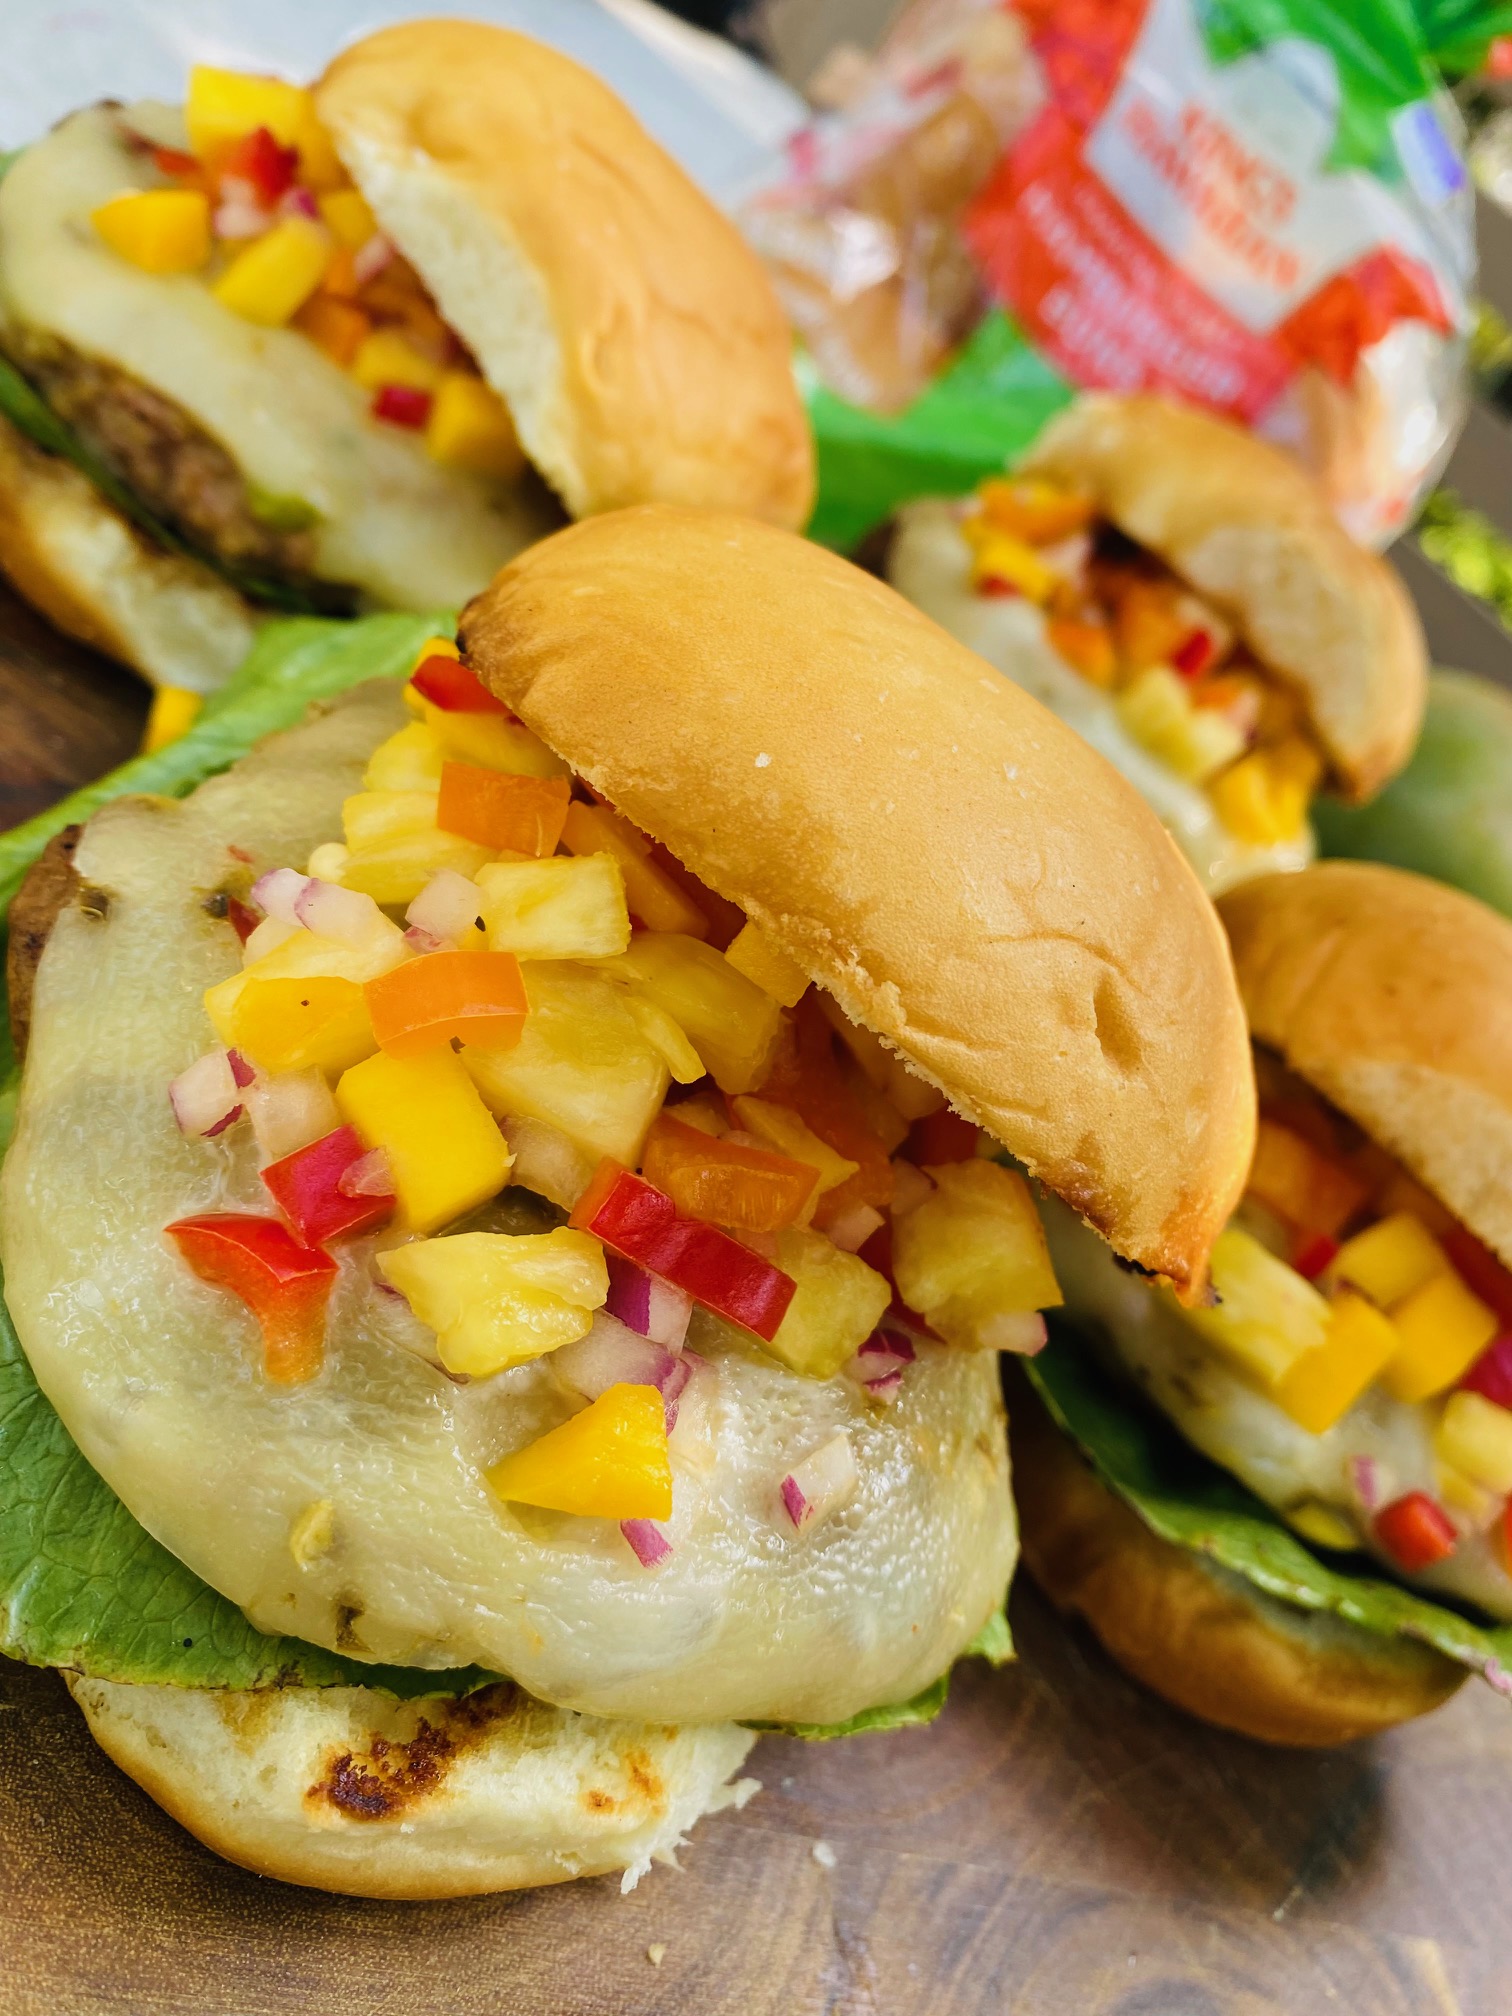 Grilled turkey burger patty covered and smothered in pepper jack cheese with a topped with mango pineapple salsa served on a KING'S HAWAIIAN Sweet Hamburger Bun.